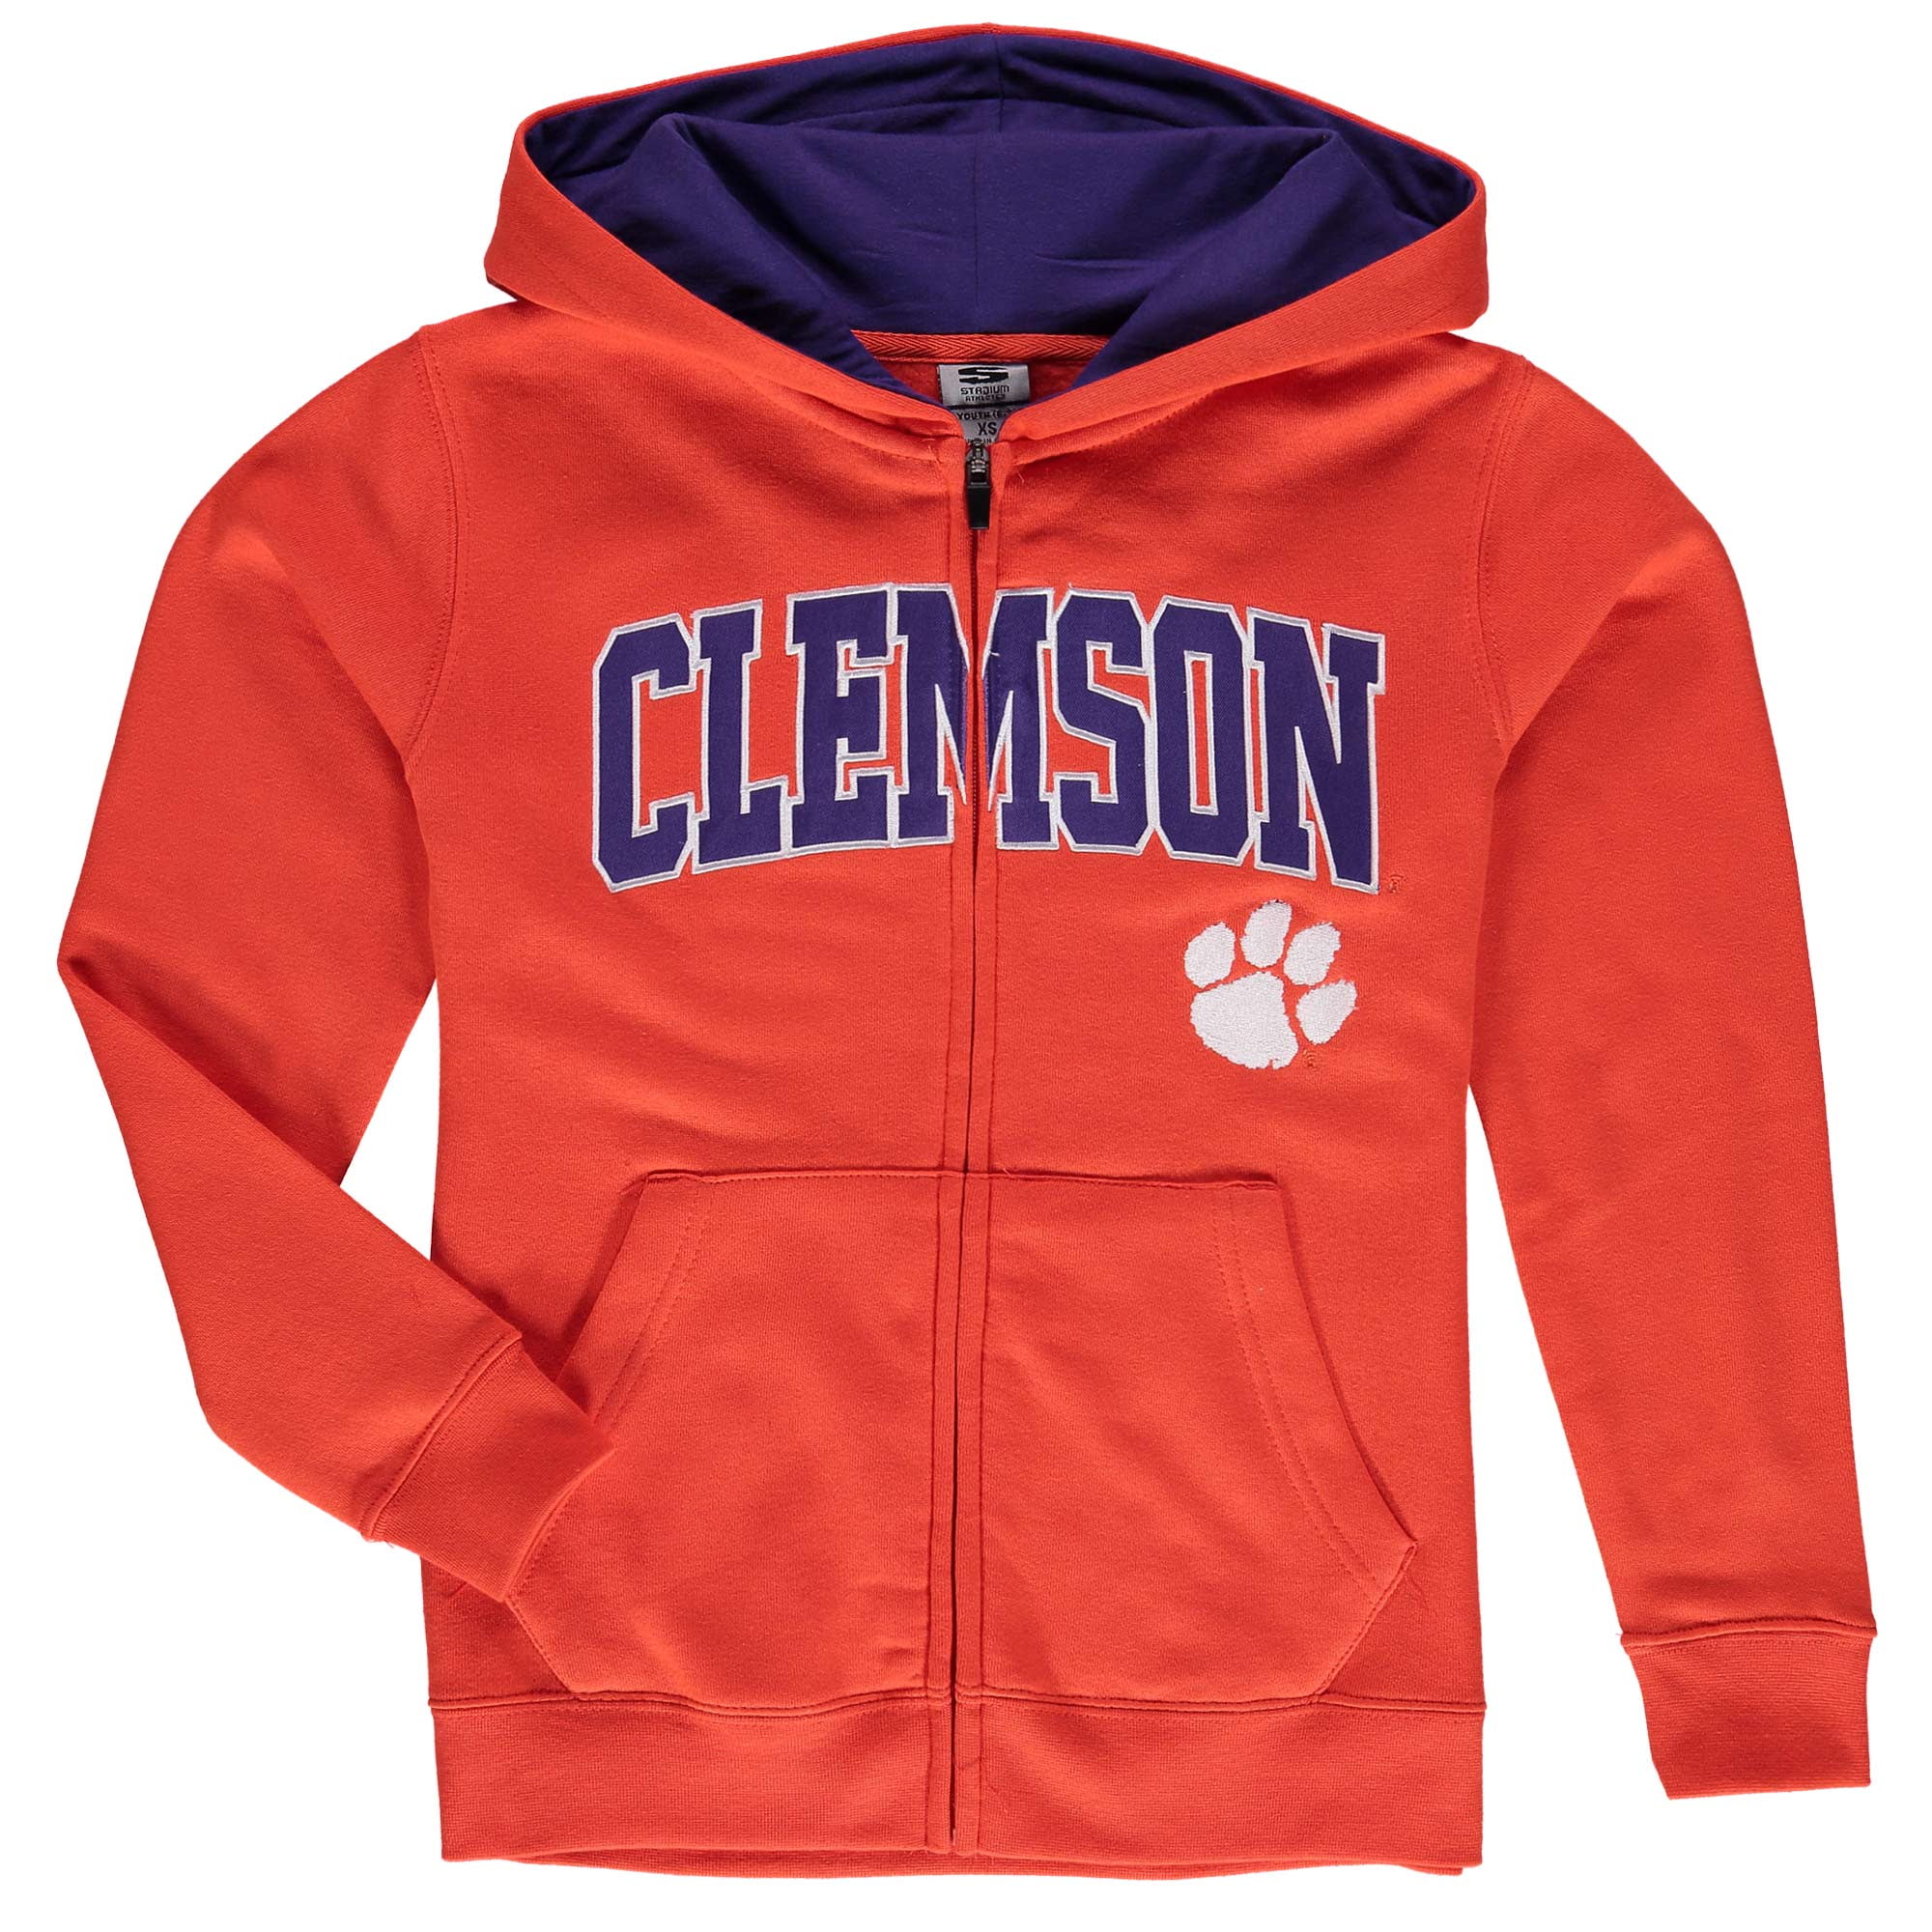 Fast Asleep Pjs Clemson Tigers University Baby and Toddler Hooded Romper